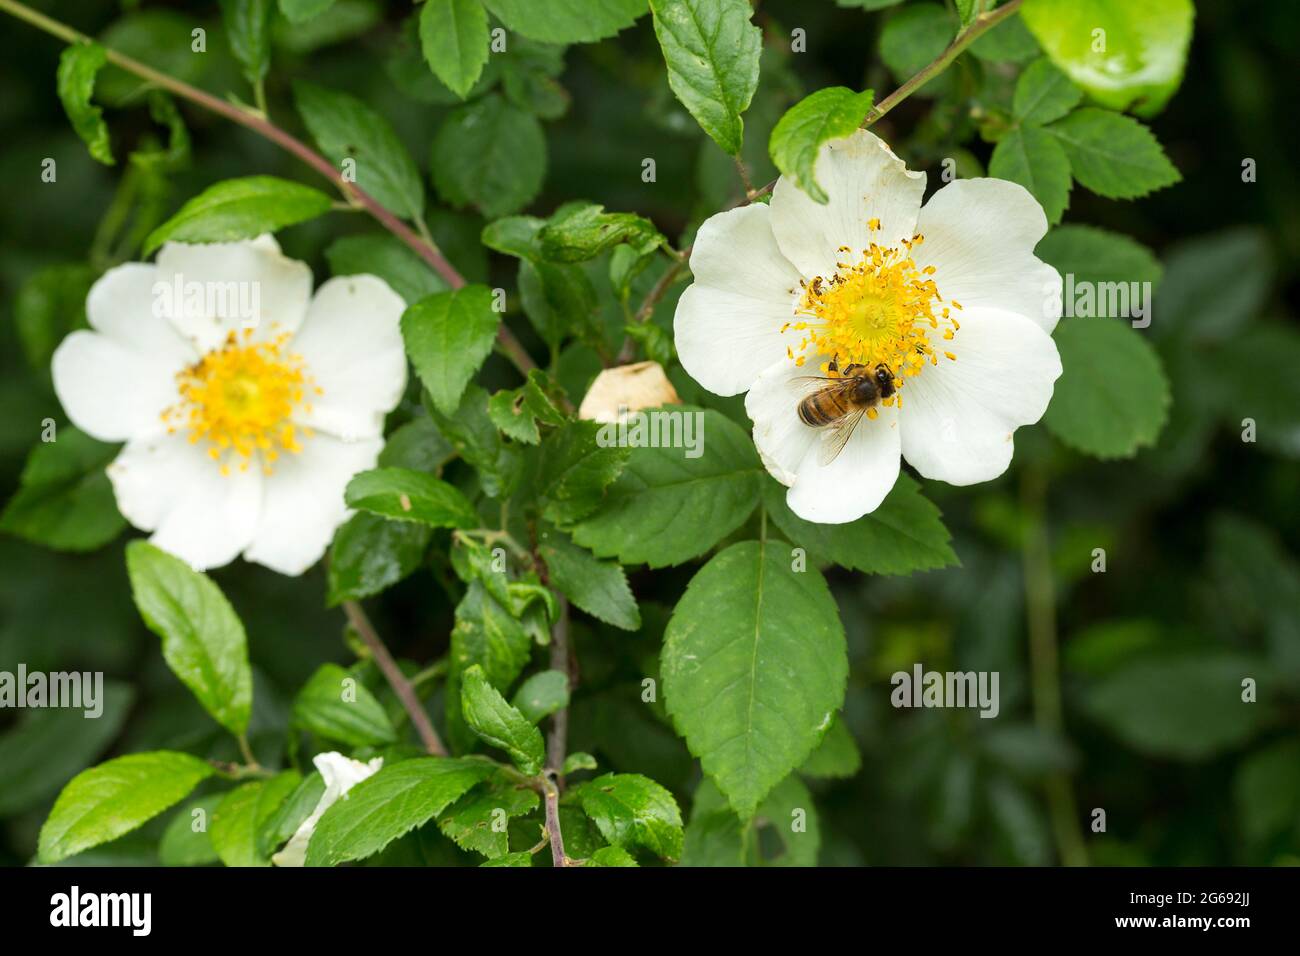 Field roses (rosa arvensis) with bee, hedgerow shrub white petals yellow centre forms clumps from trailing purplish stems with curved thorns Stock Photo